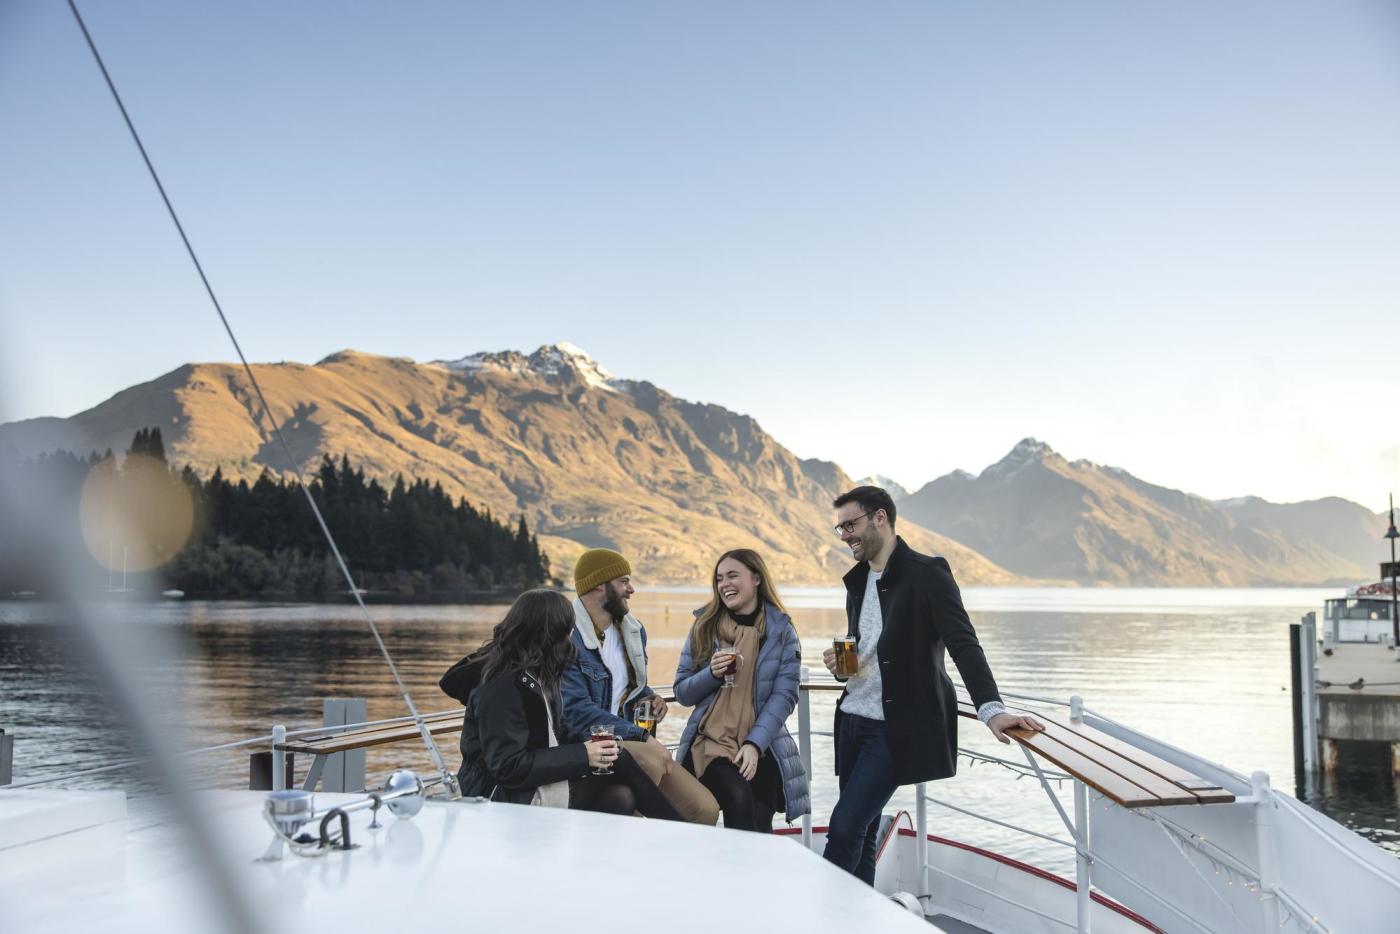 Friends sitting together at a bar on a boat with still lake and mountains in the background